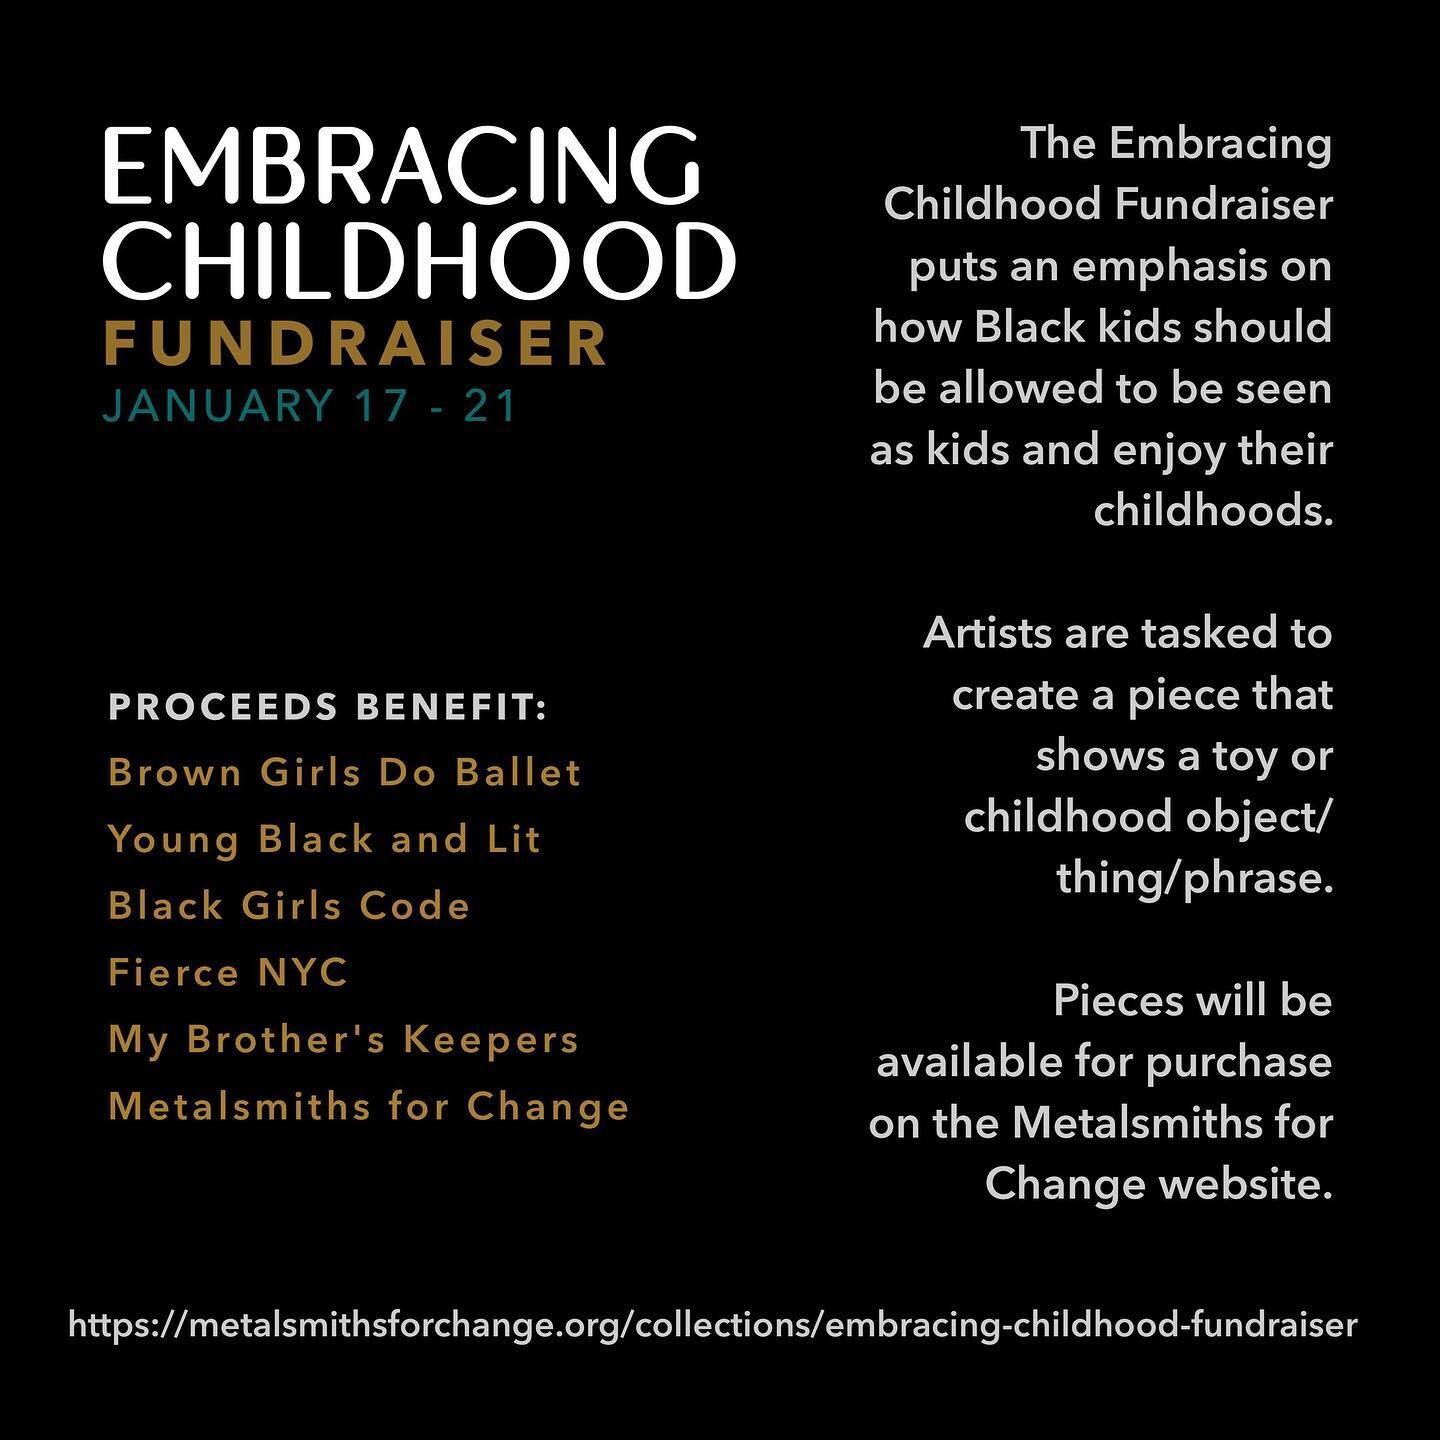 The Embracing Childhood Fundraiser through @metalsmithsforchange focuses on the youth to put an emphasis on how Black kids should be allowed to be seen as kids and enjoy their childhoods. Artists are tasked to create a piece that shows a toy or child